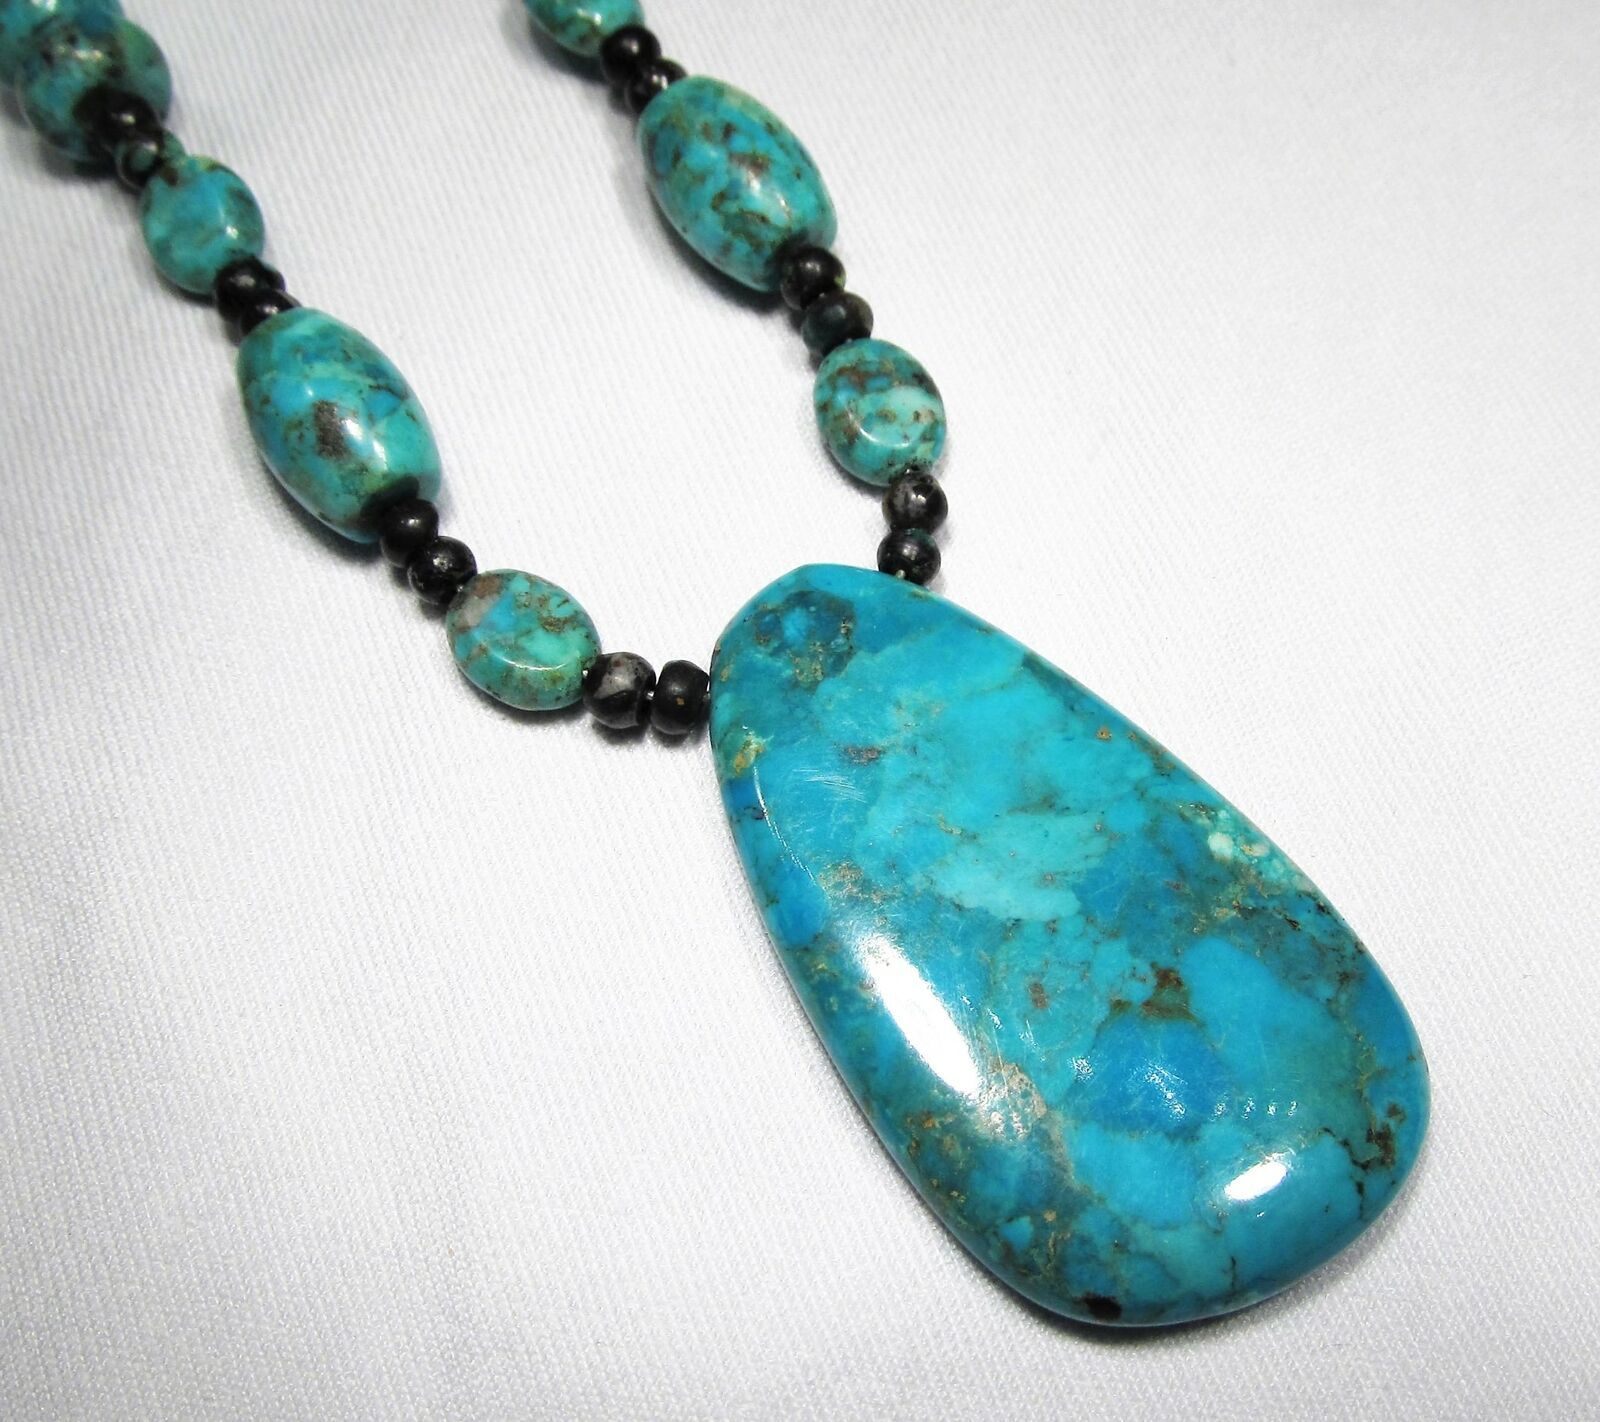 Primary image for Jay King DTR Sterling Turquoise Bead & Large Pendant Necklace C2162